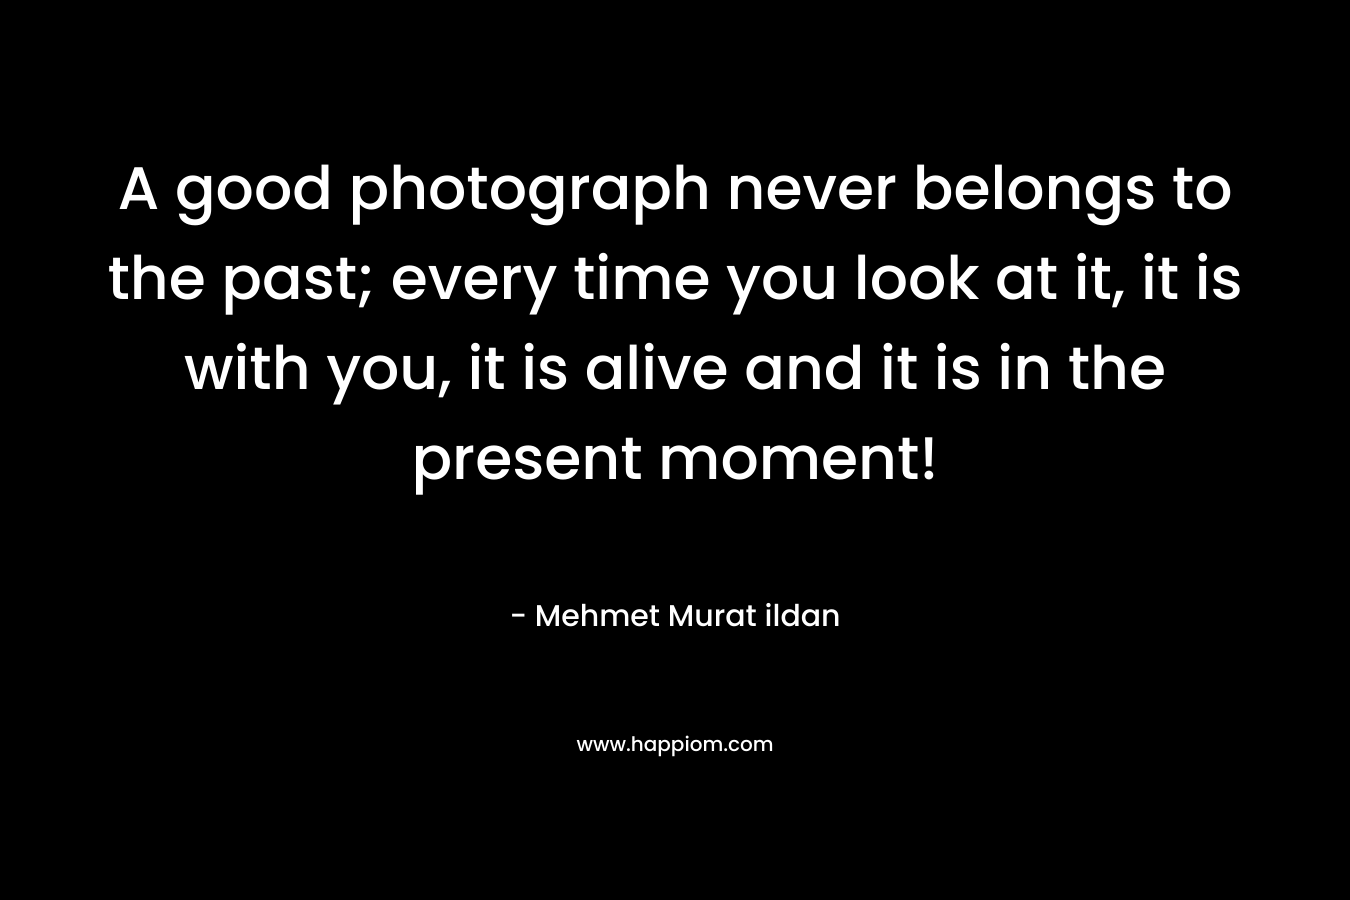 A good photograph never belongs to the past; every time you look at it, it is with you, it is alive and it is in the present moment! – Mehmet Murat ildan